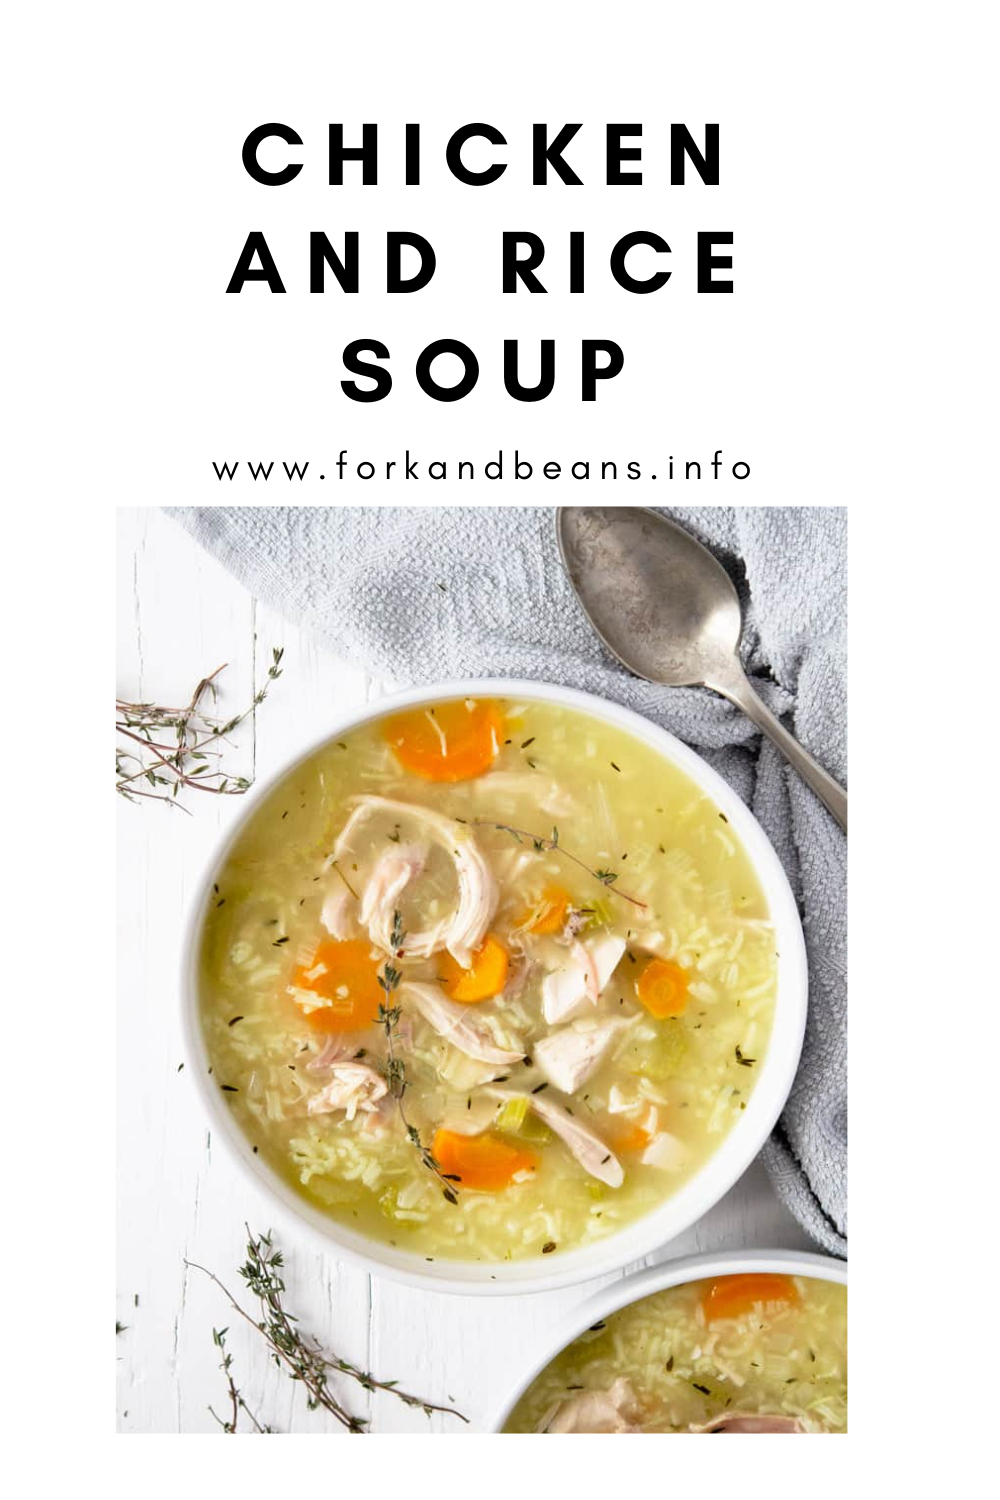 20 MINUTE ROTISSERIE CHICKEN AND RICE SOUP